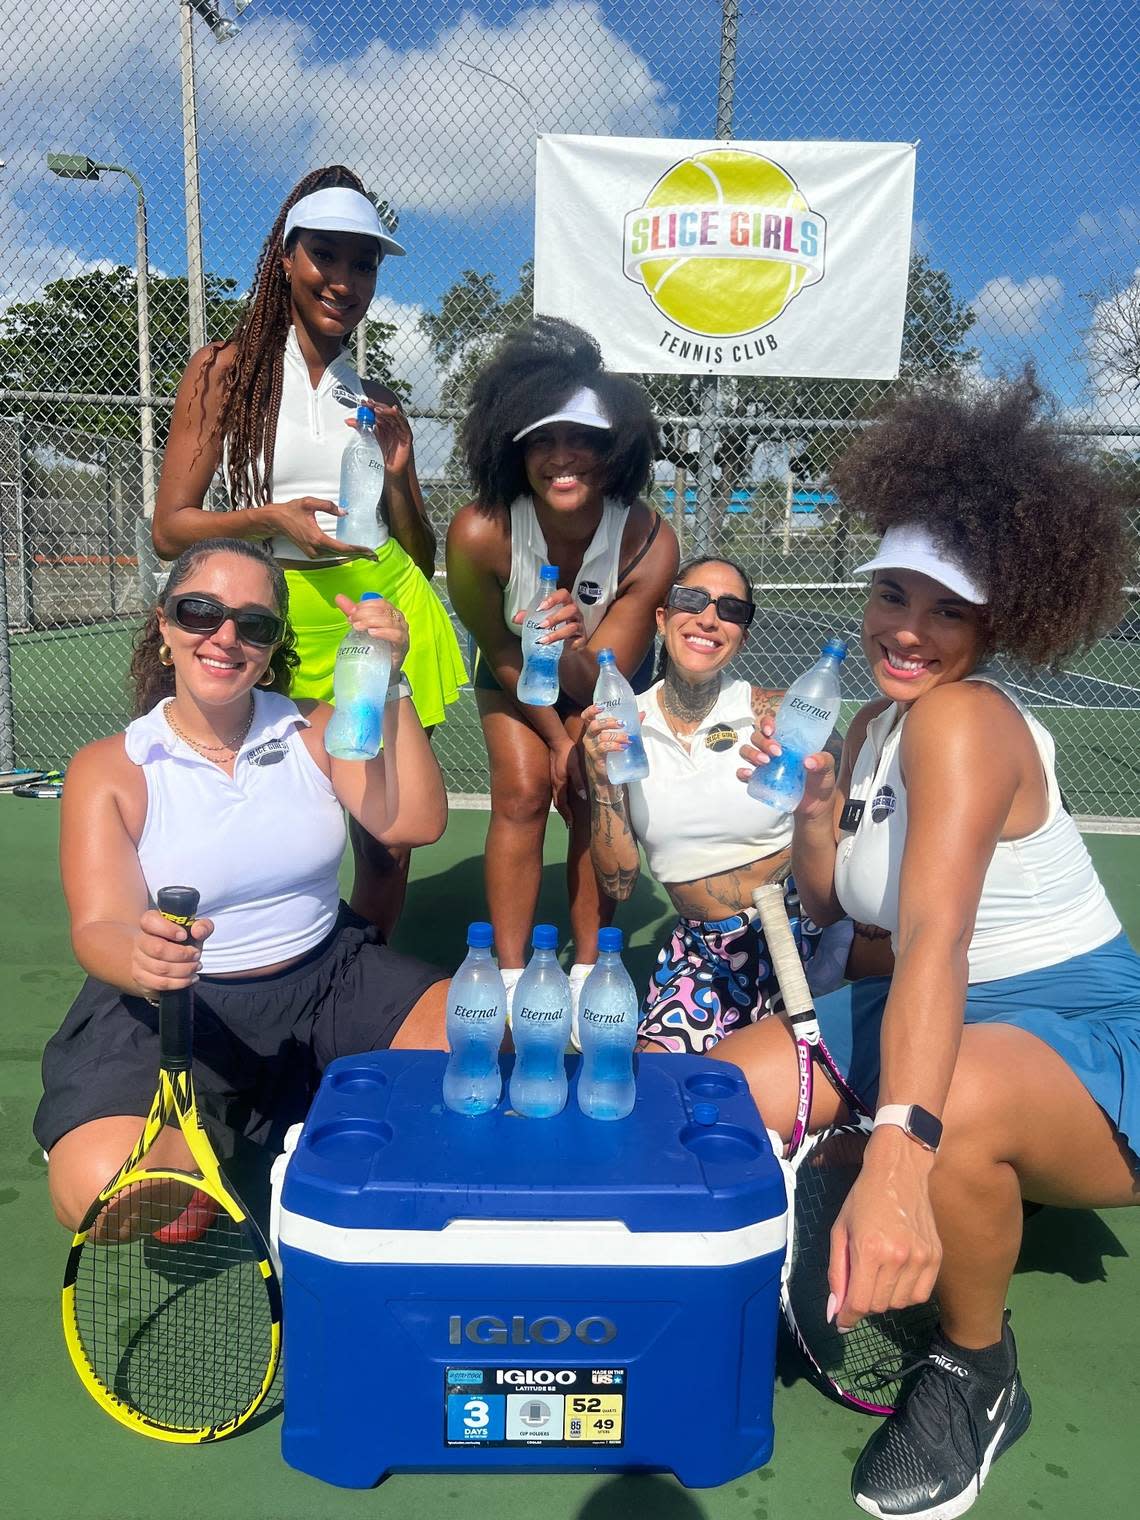 Slice Girls Tennis Club co-founders Carole Hollant (left), Alexandra Philius (second from left), Shaina Jean Louis (middle) and Francesca Morgan (right) pose with participant Starr Hawkins (second from right) during a lesson. Founded by four Miami natives in 2022, the club creates a space for women of color to be themselves while learning a skill historically reserved for the white elite. Slice Girls Tennis Club